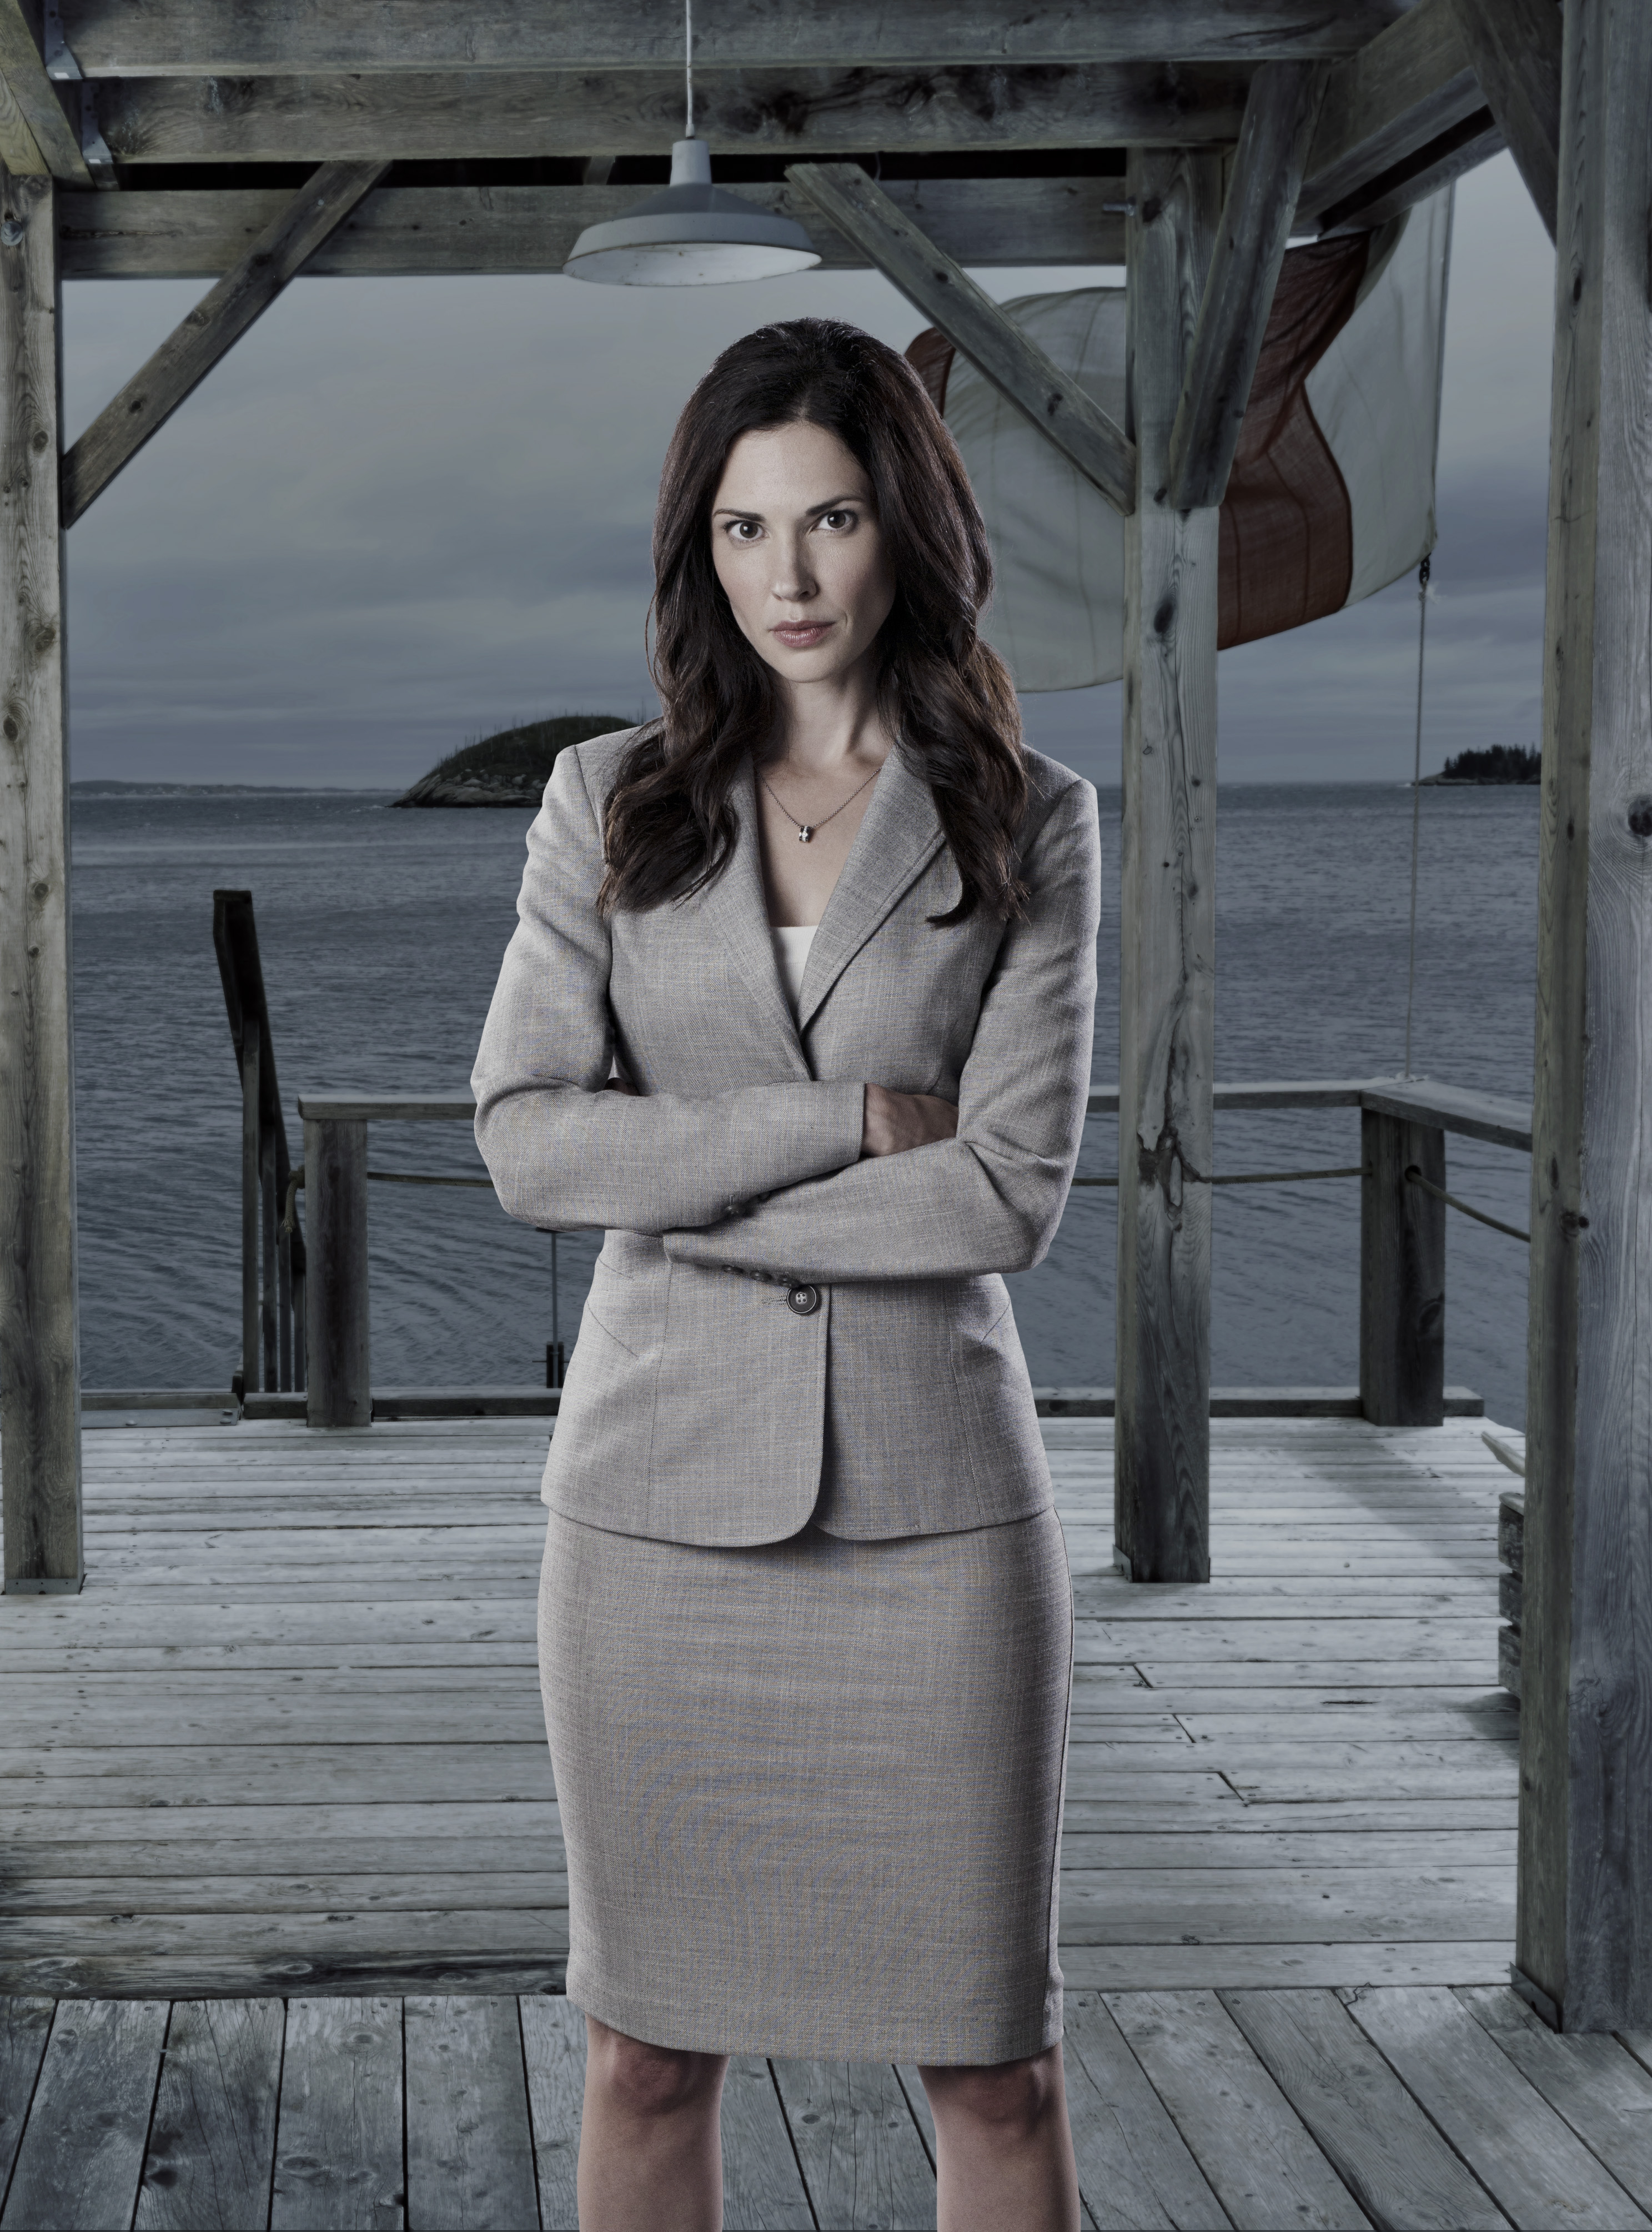 Laura Mennell as Dr. Charlotte Cross on Haven